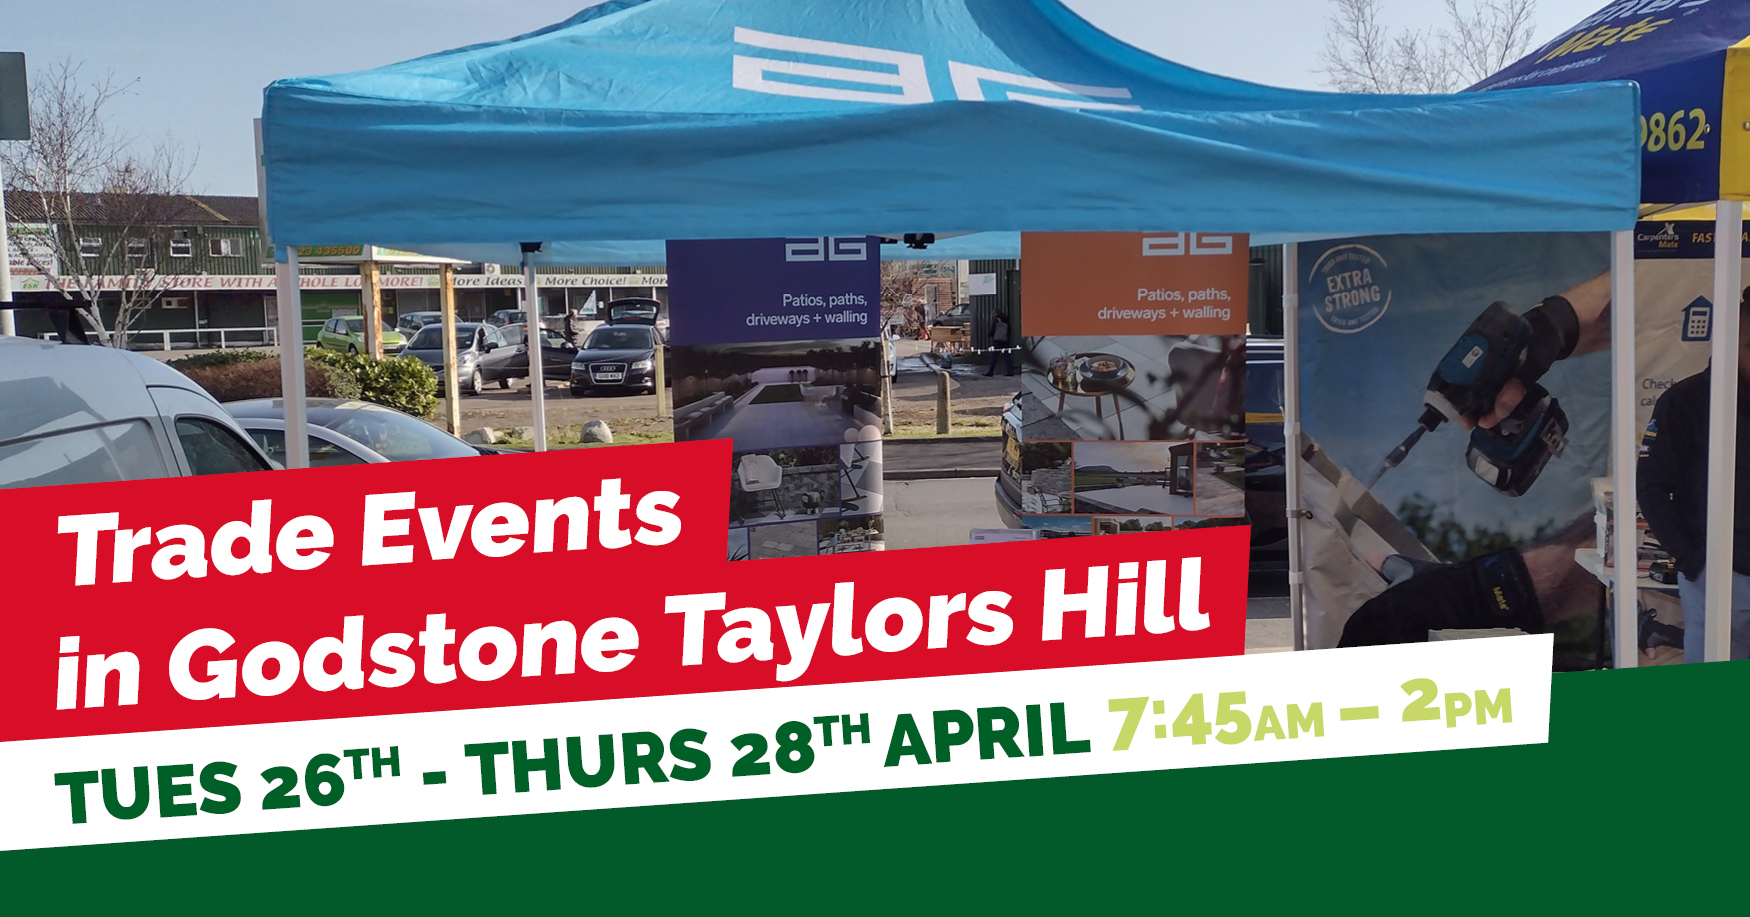 Three Days of Trade Events Announced for Godstone Taylors Hill